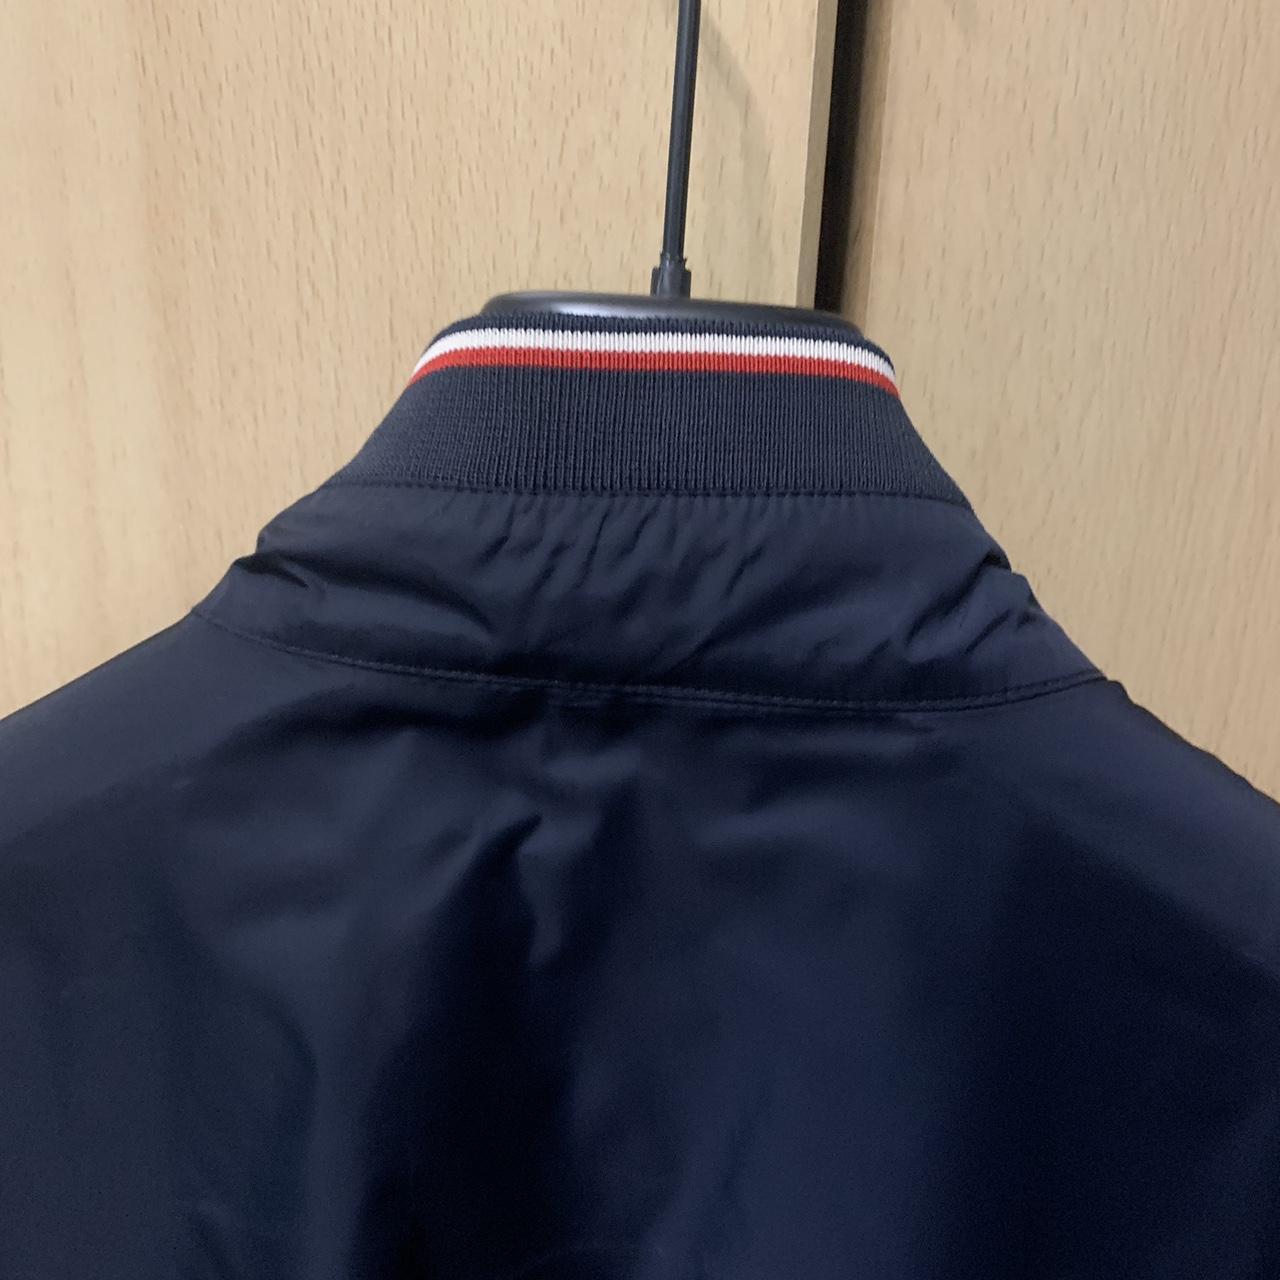 Moncler Albert Jacket Used but in perfect condition... - Depop